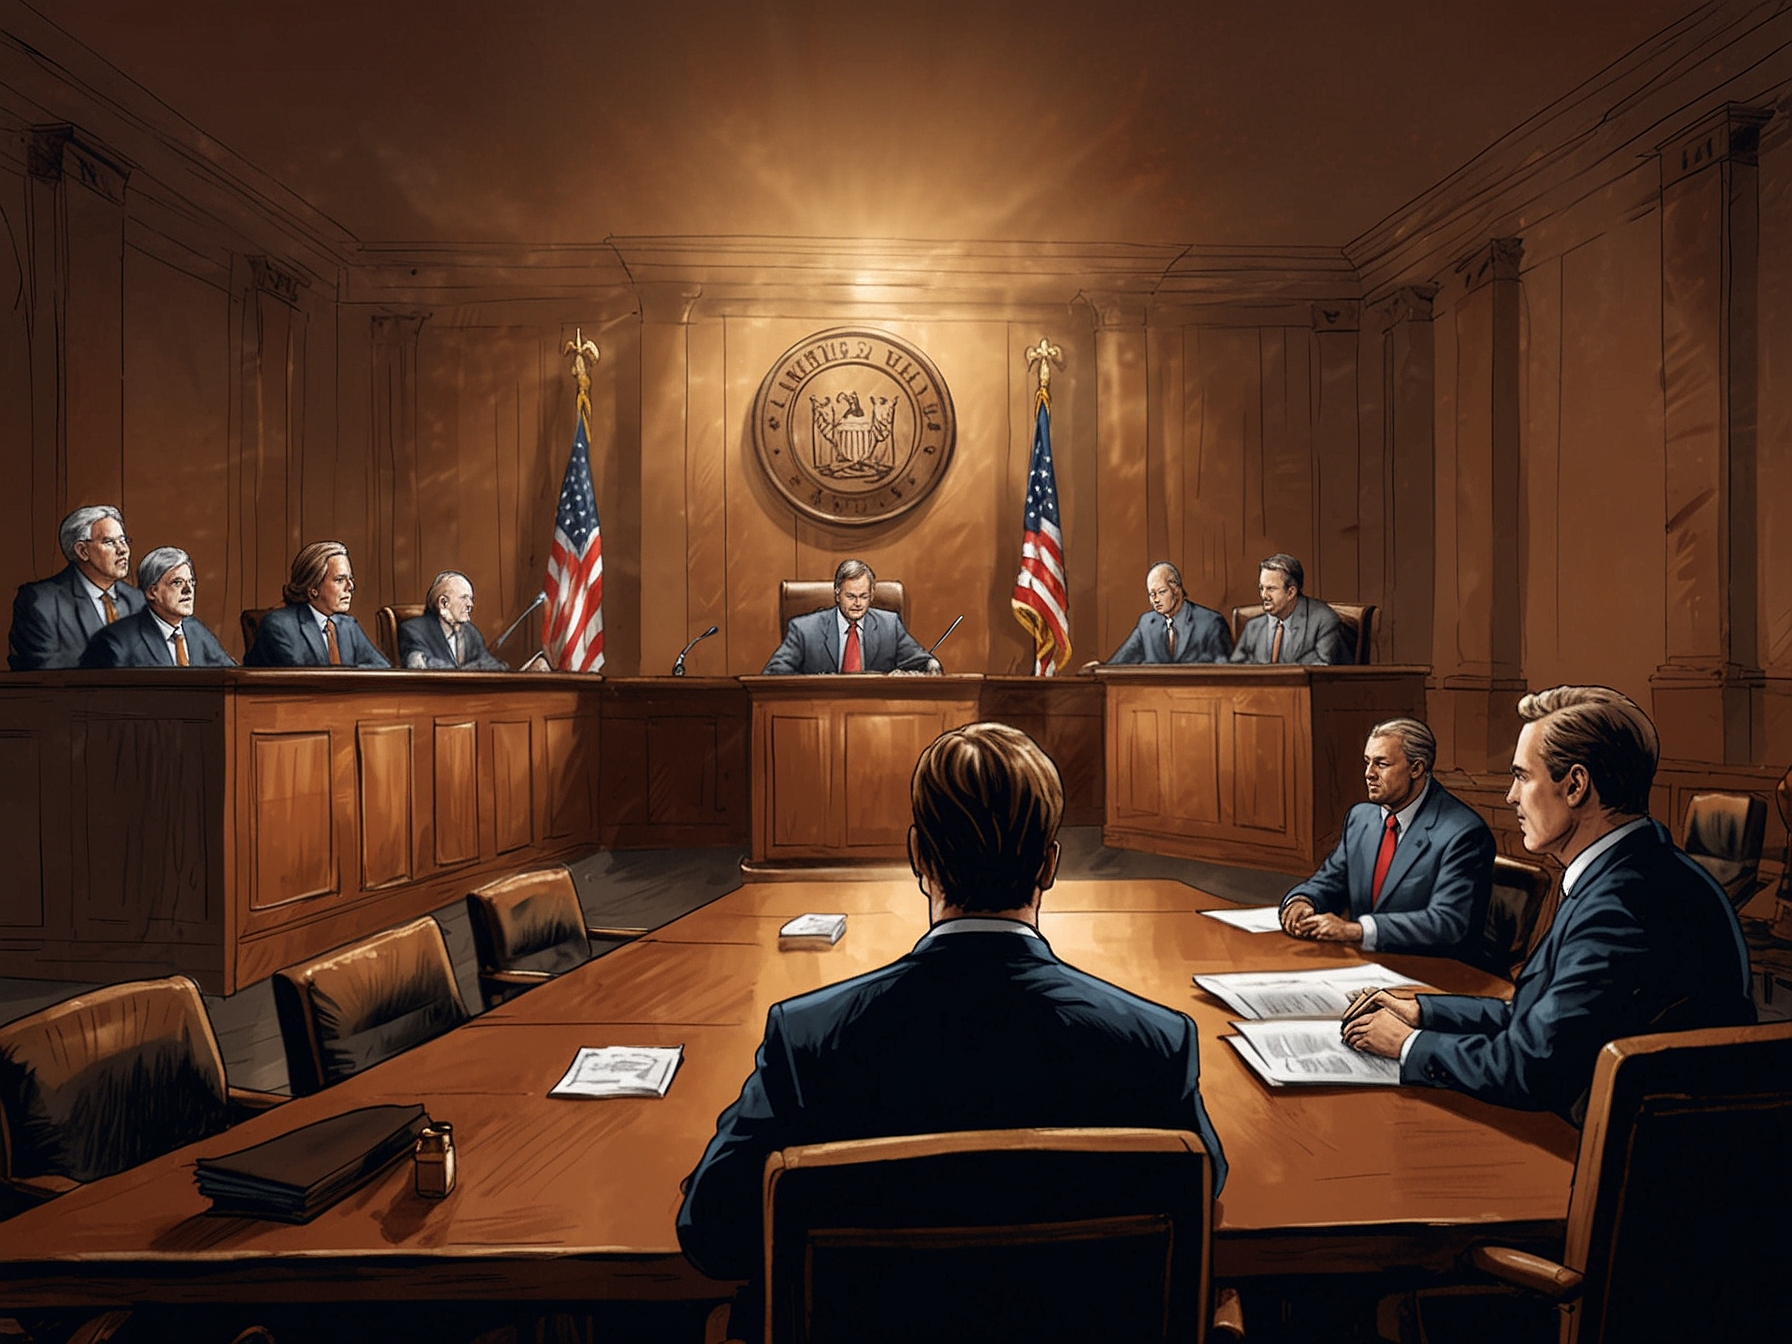 A courtroom scene with lawyers making their closing arguments, representing the plaintiffs and the NFL. The backdrop shows a projection highlighting the key points of the case.